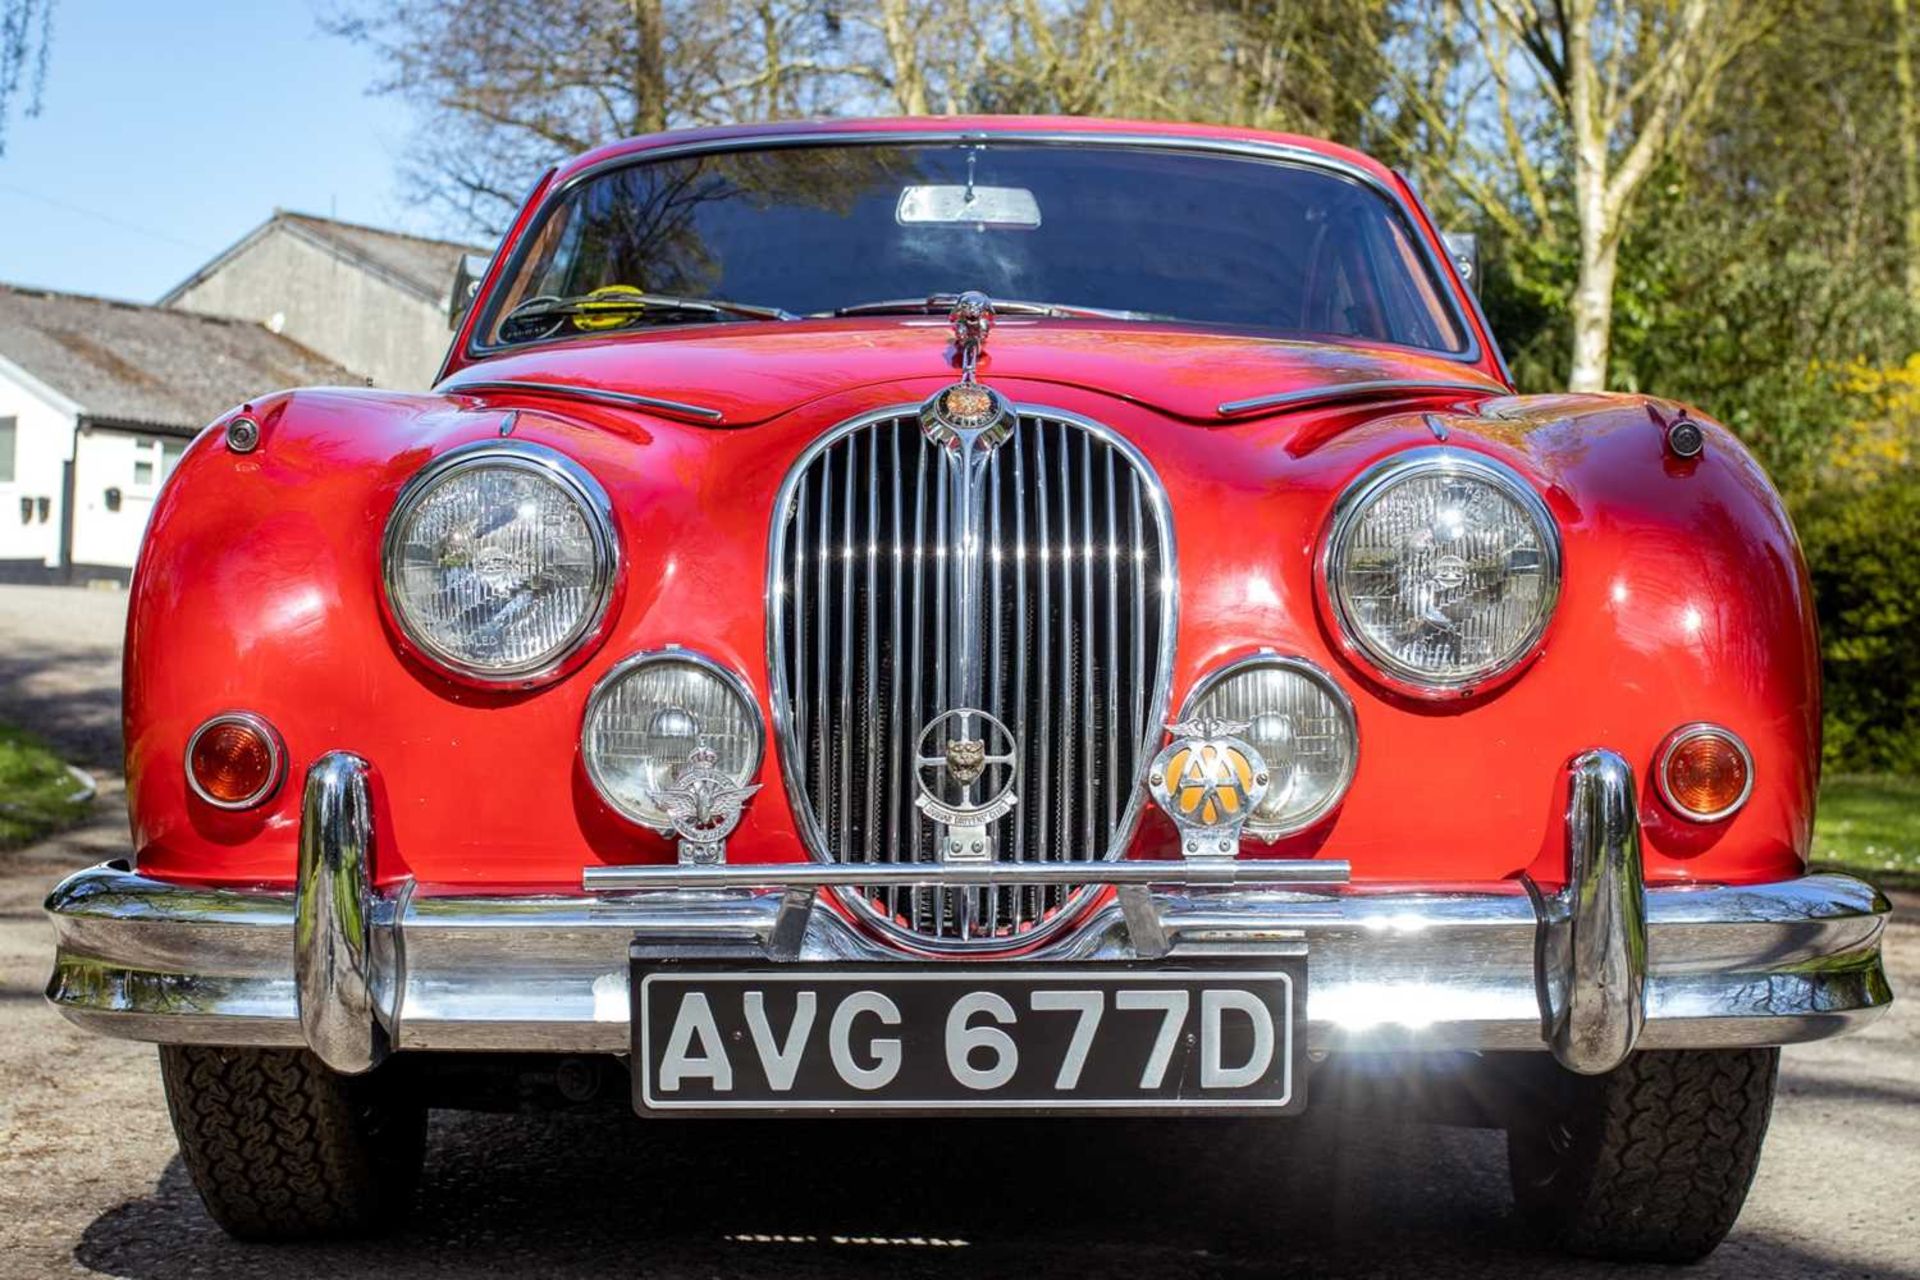 1966 Jaguar MKII 2.4 Believed to have covered a credible 19,000 miles, one former keeper  - Image 19 of 86